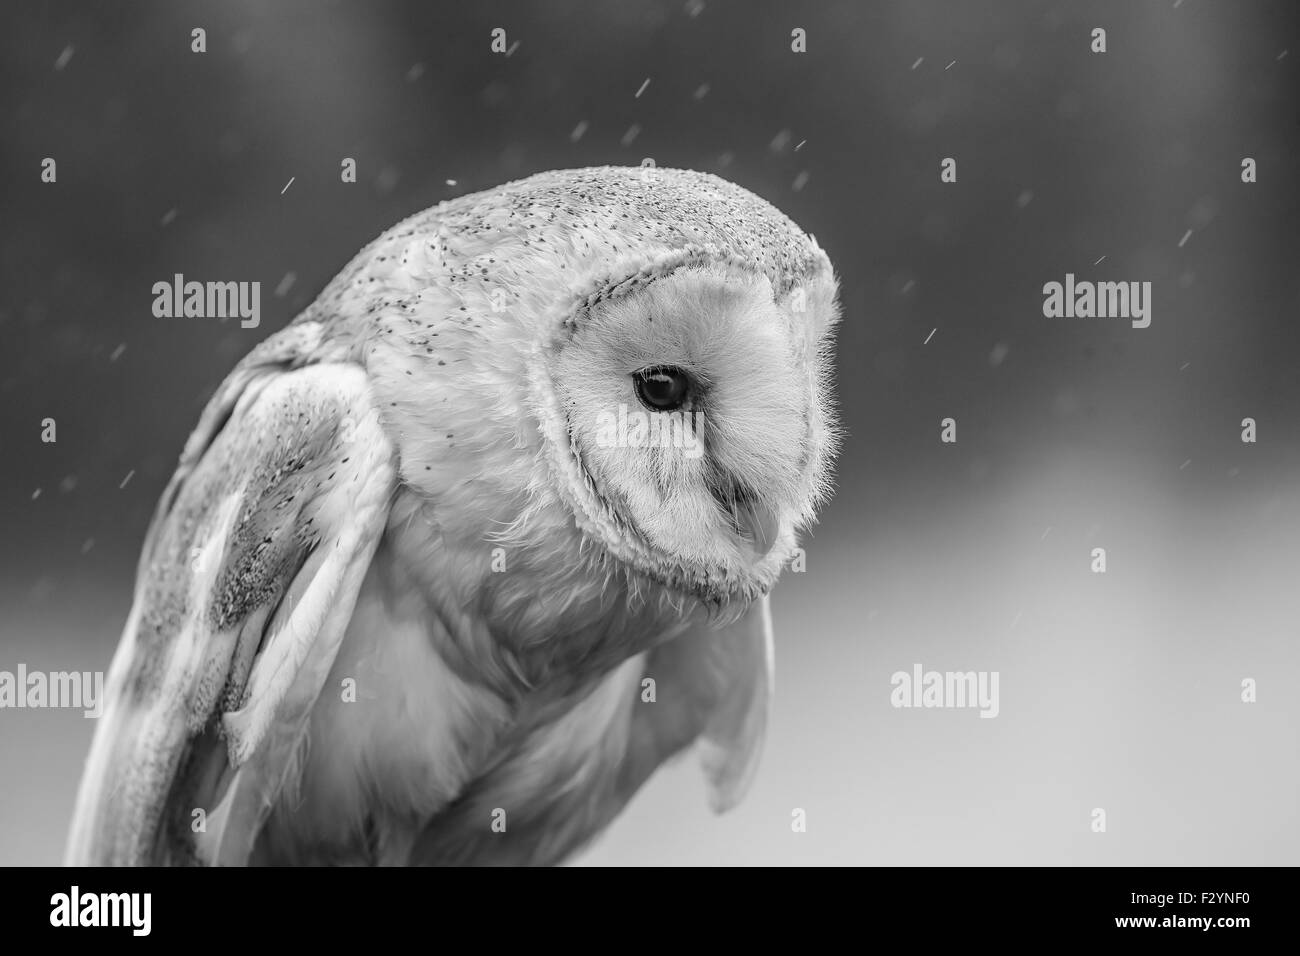 A close up photograph of a barn owl taken in the rain and produced in black and white. Stock Photo